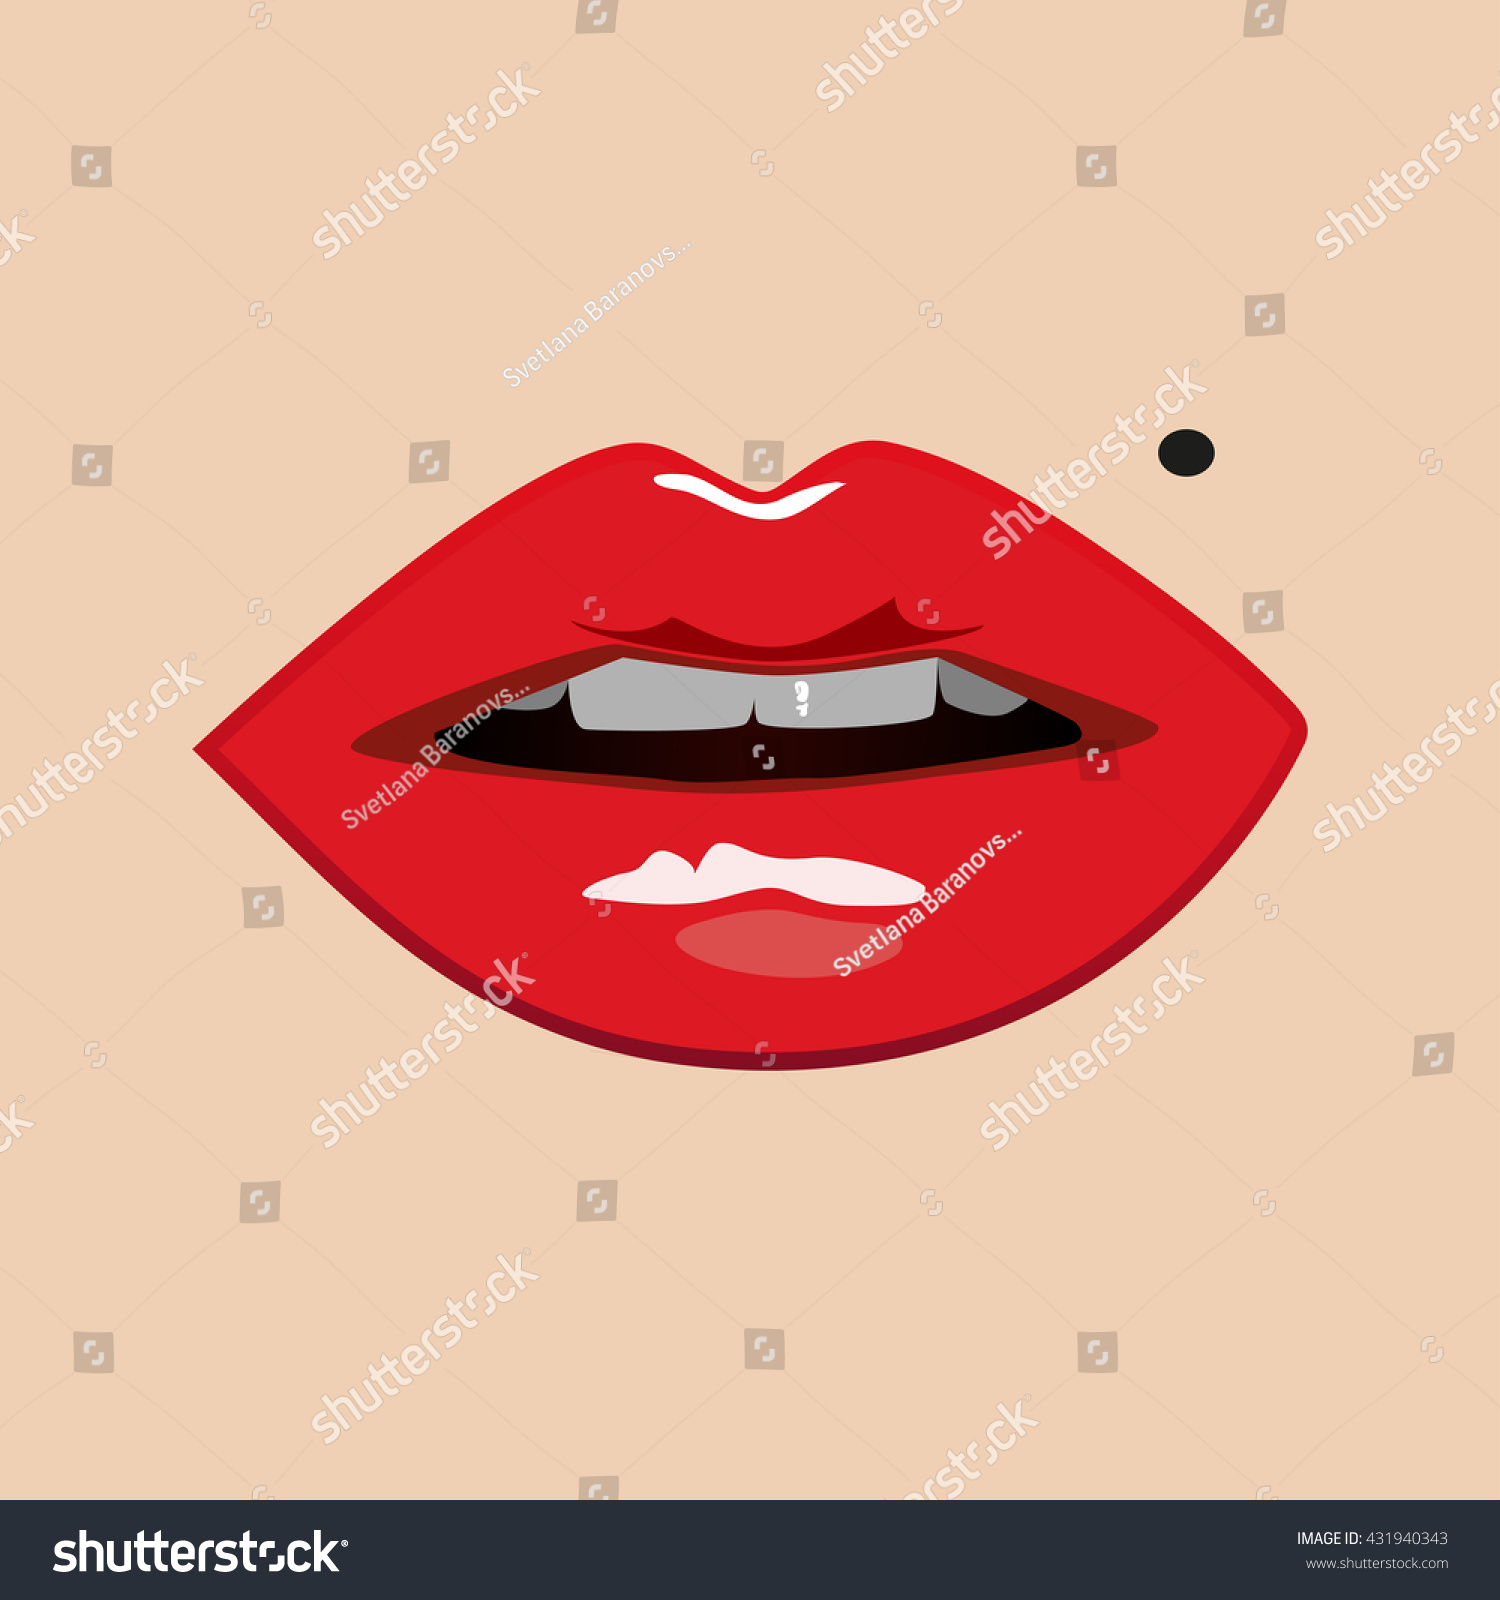 Plump Red Lips Mole On Her Stock Vector Royalty Free 431940343 https www shutterstock com image vector plump red lips mole on her 431940343